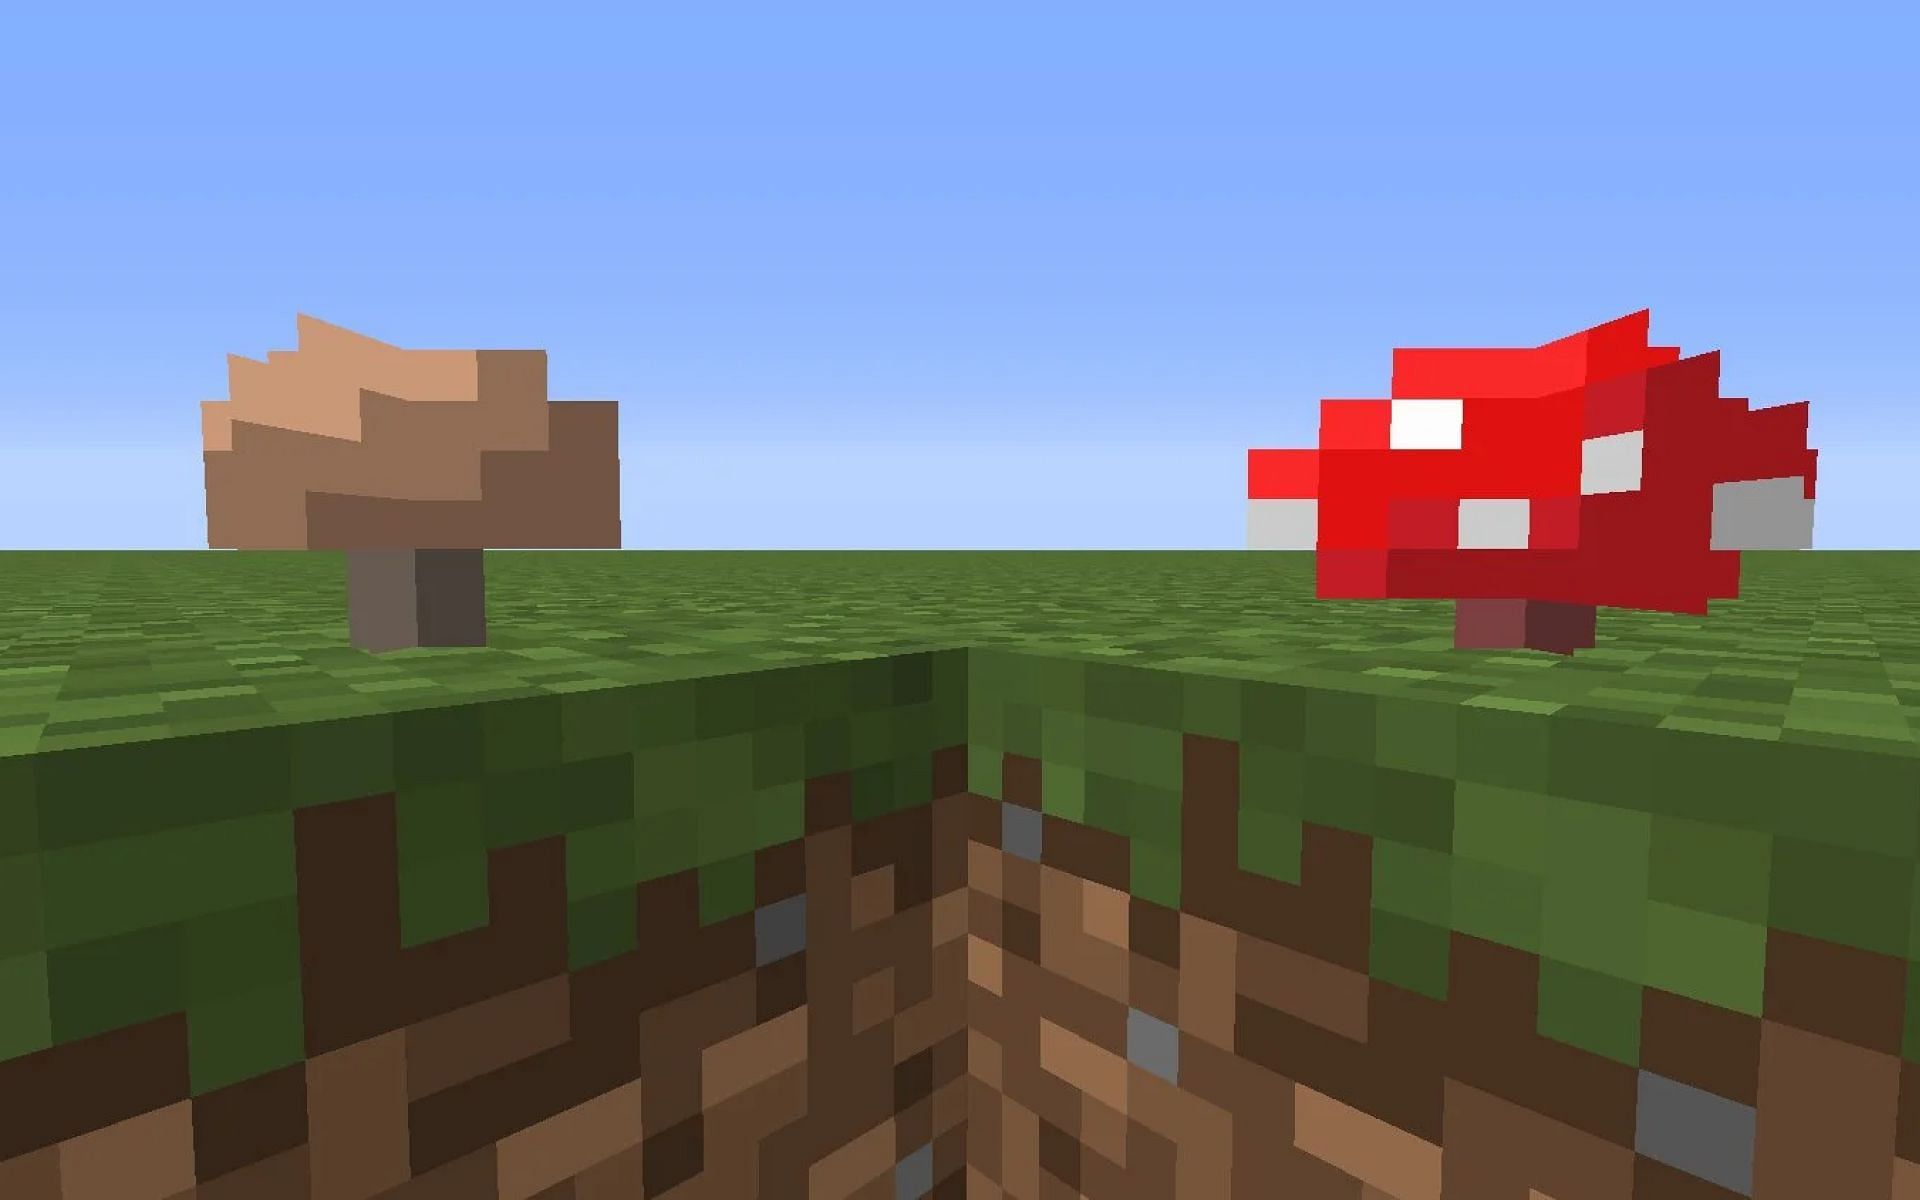 An image of a red and brown mushroom in-game. (Image via Minecraft)